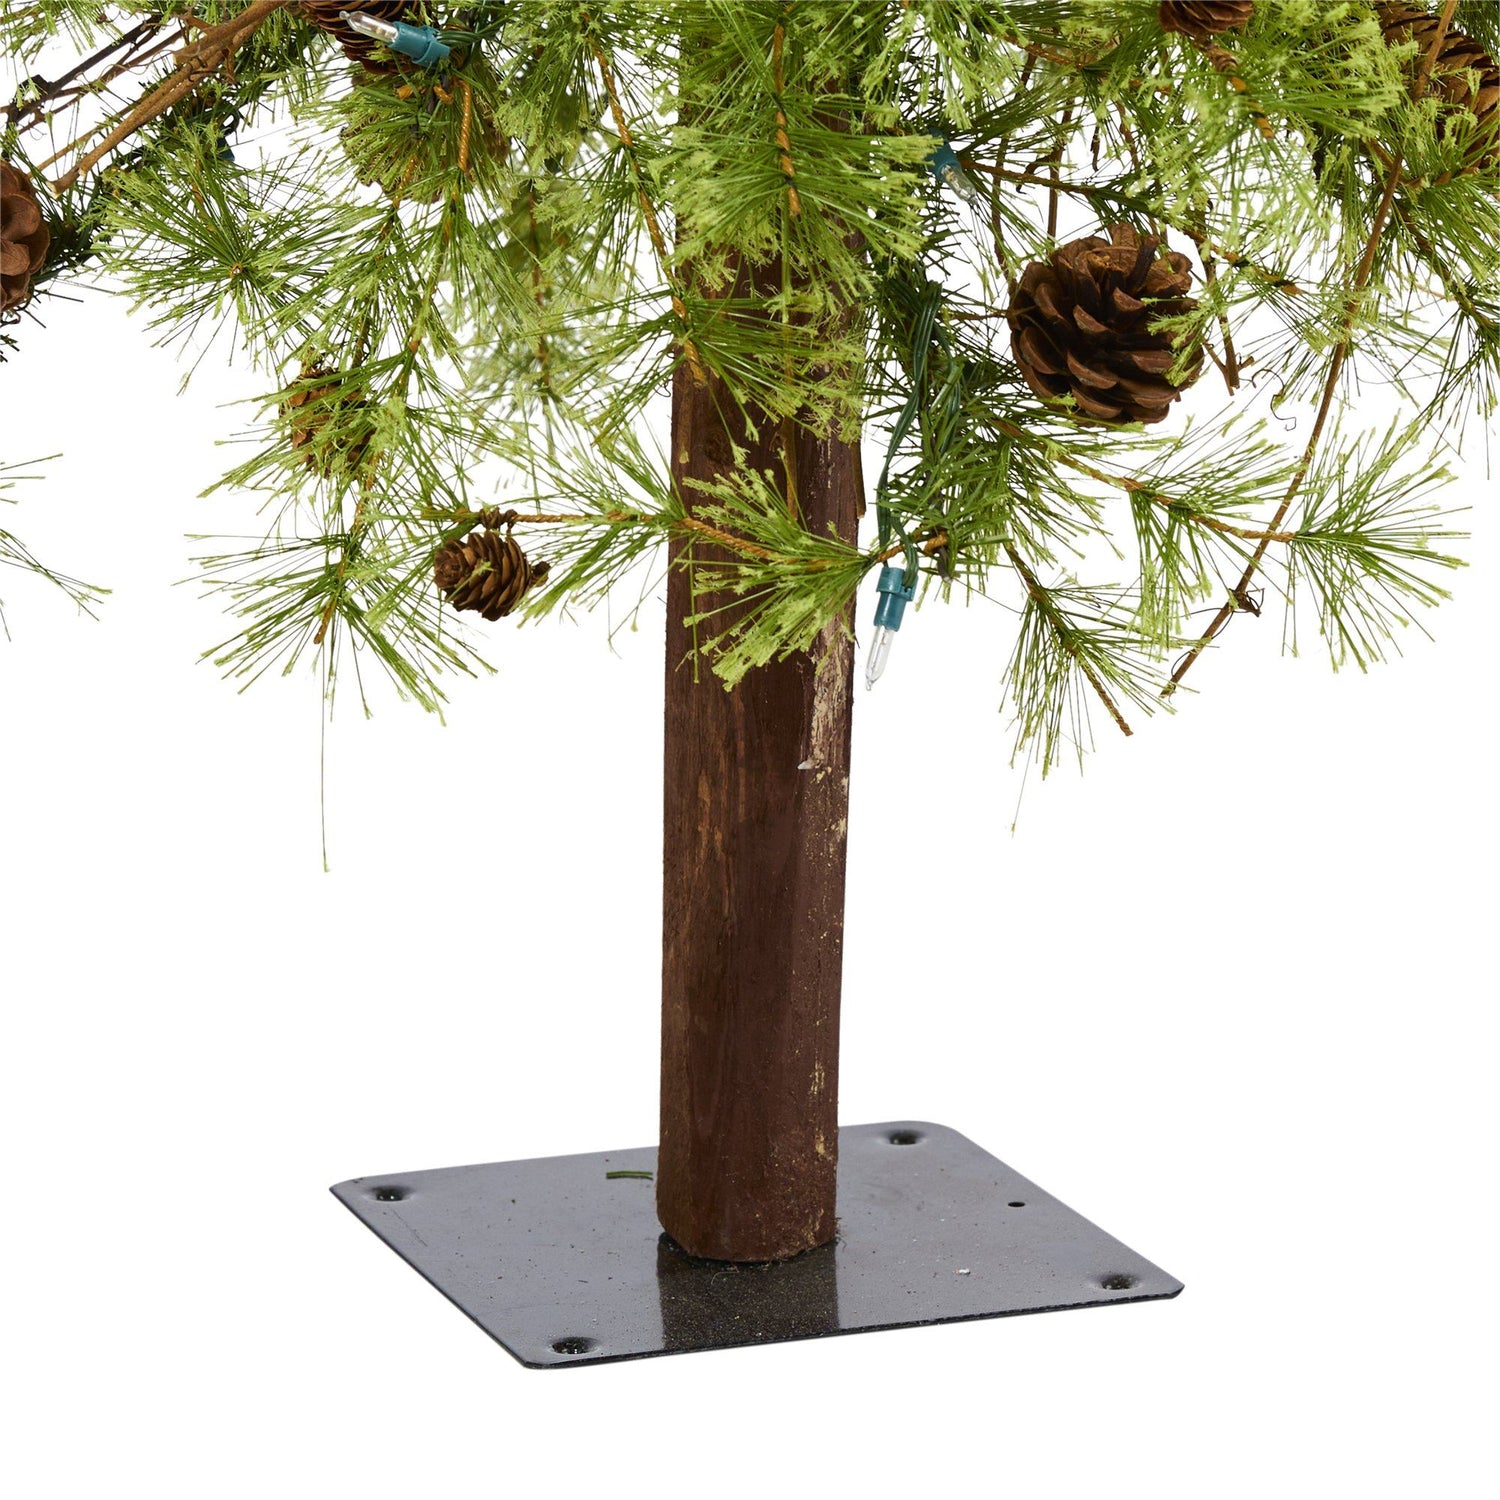 5' Wyoming Alpine Artificial Christmas Tree with 100 Clear (multifunction) LED Lights and Pine Cones on Natural Trunk